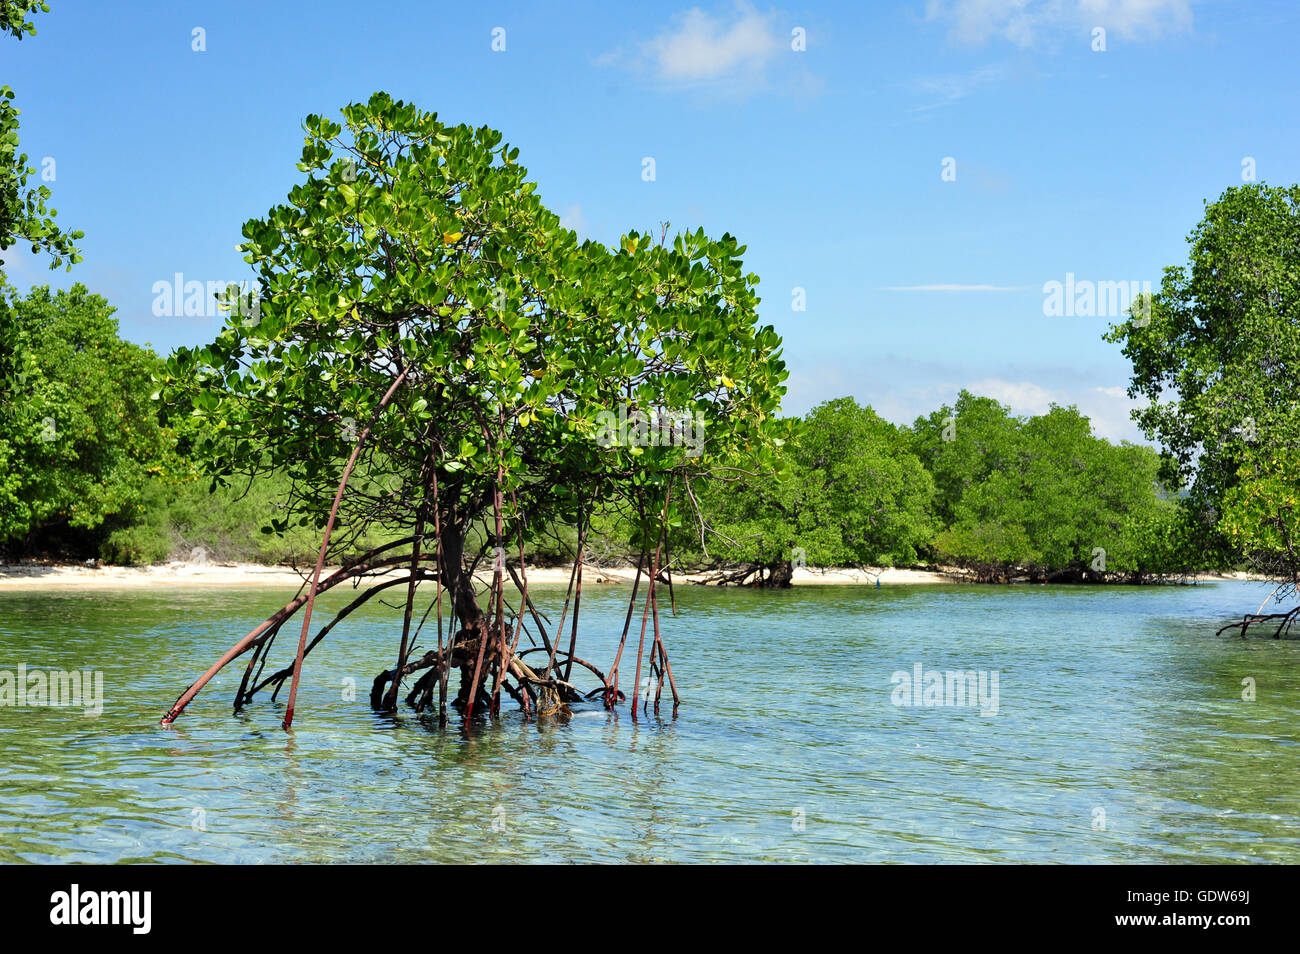 Protected Mangrove forest and trees in West Bali Taman National Park in Bali, Indonesia Stock Photo